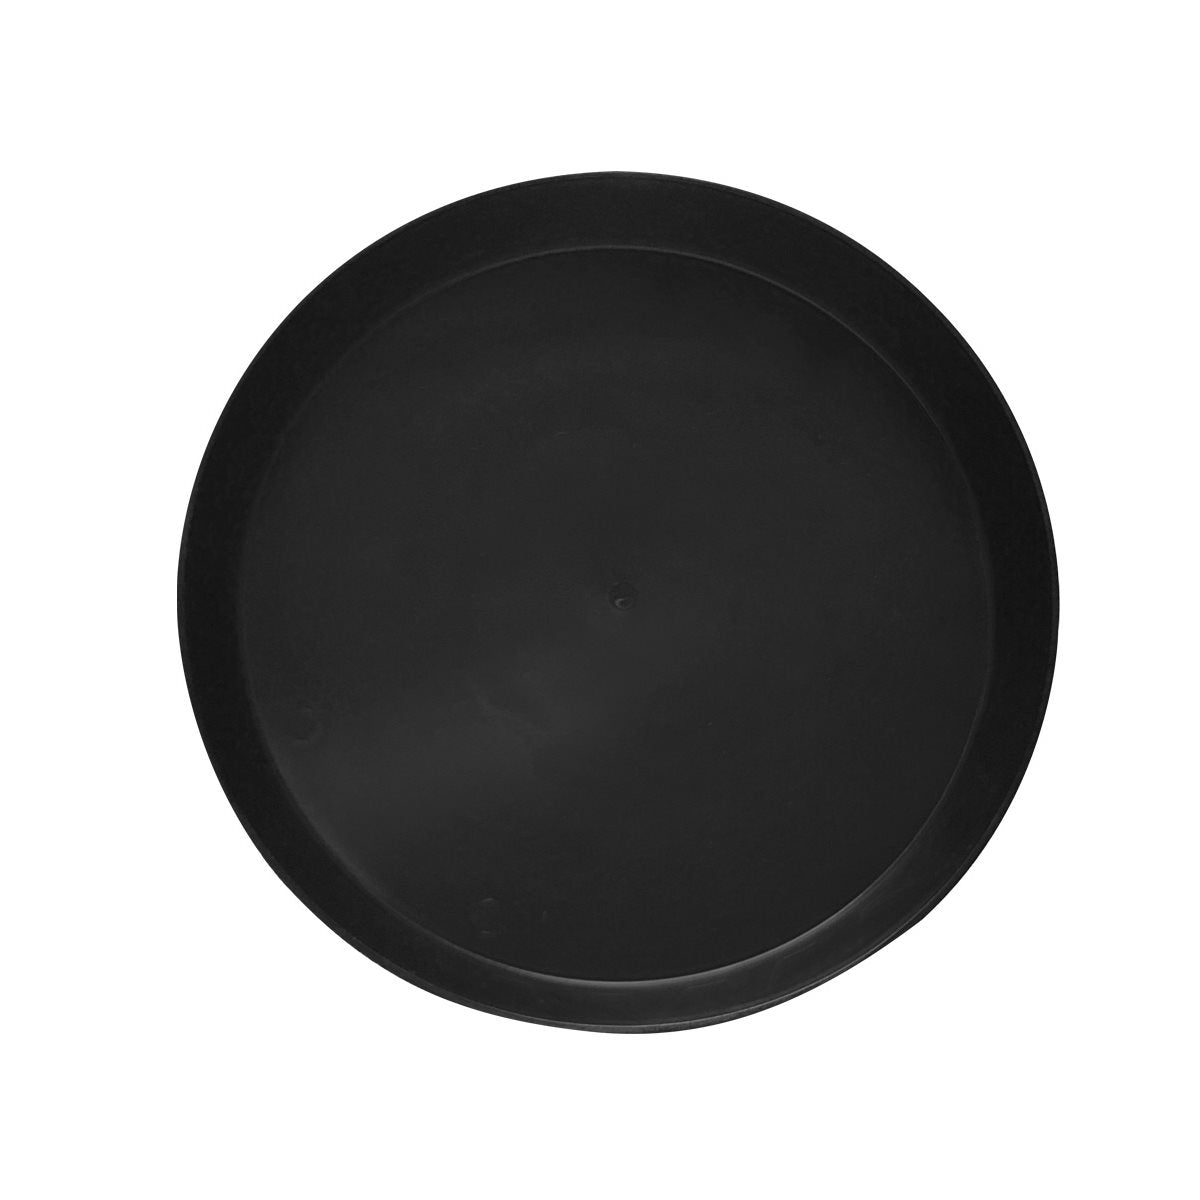 Product Secondary Image:Alfred Black Saucer Reusable / pack of 10